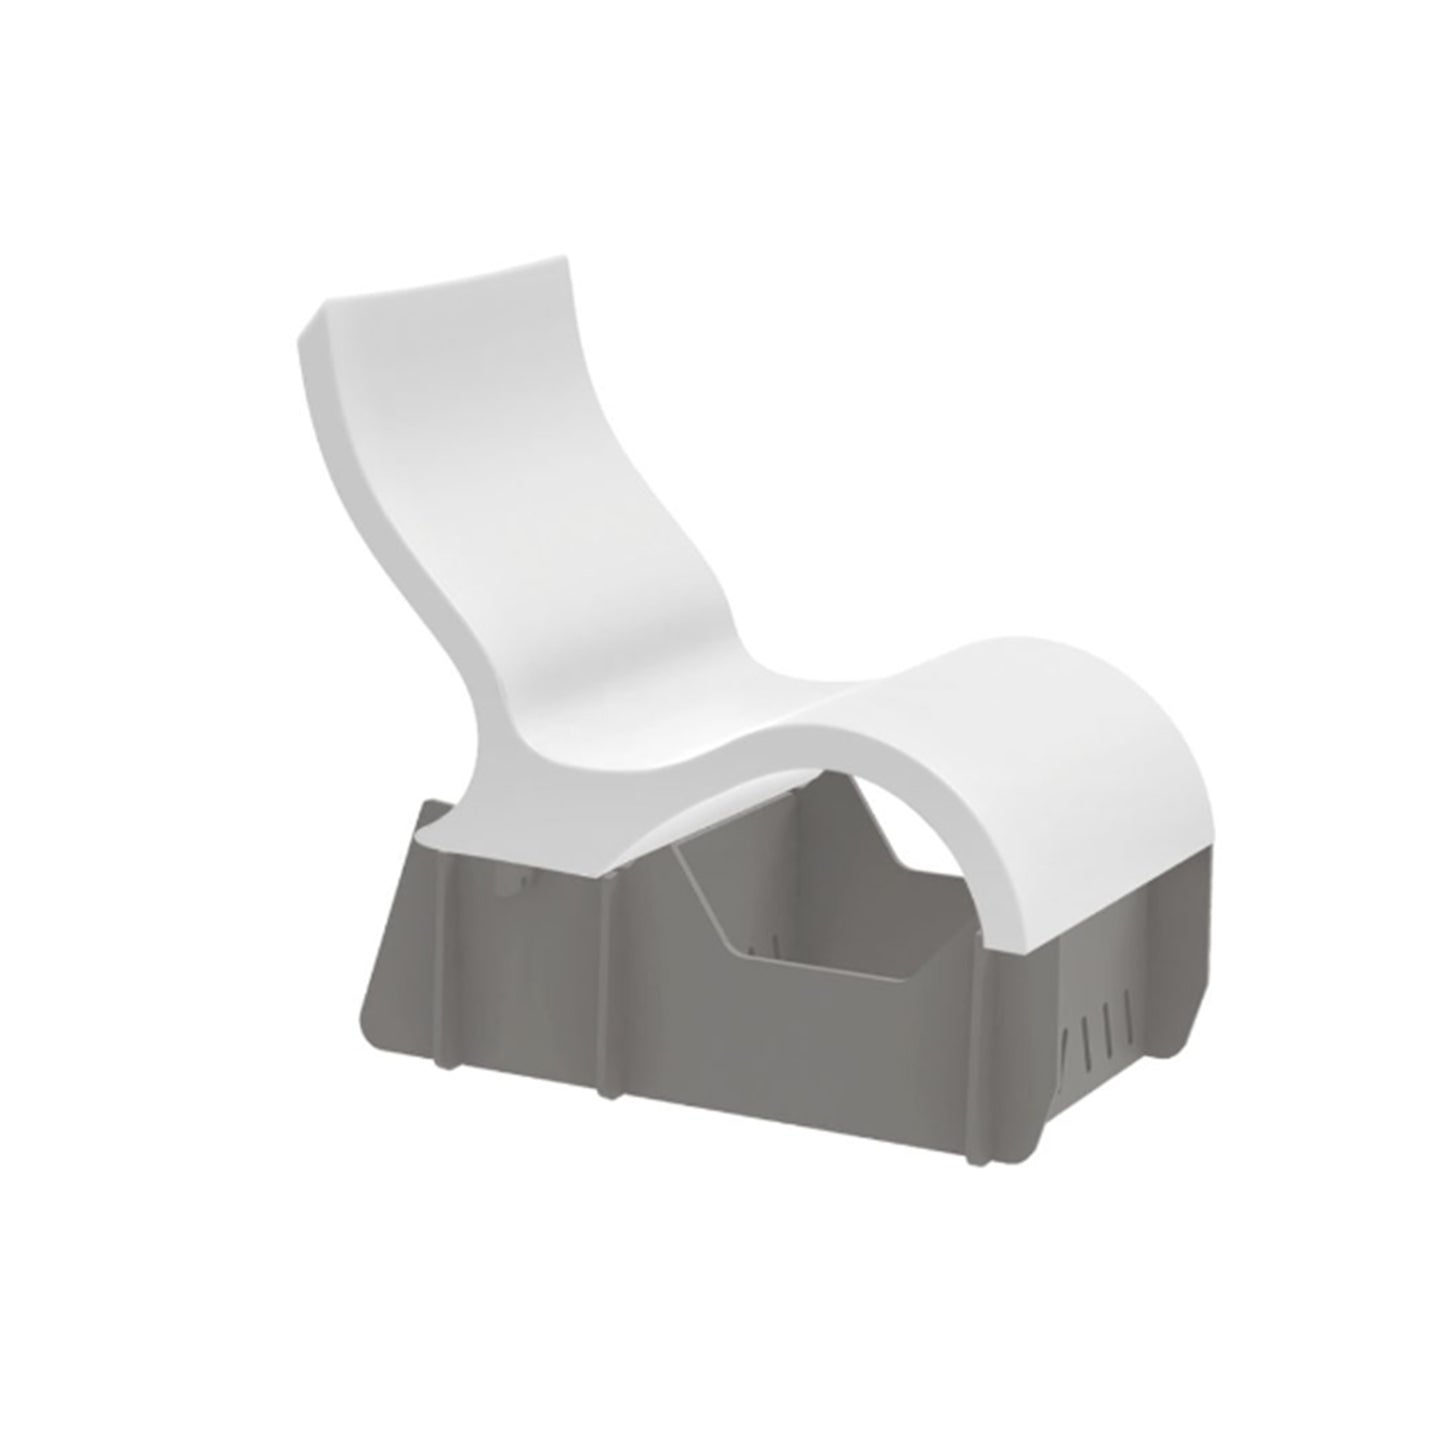 Ledge Lounger Signature Lowback Chair Riser (LOWBACK CHAIR SOLD SEPARATELY)